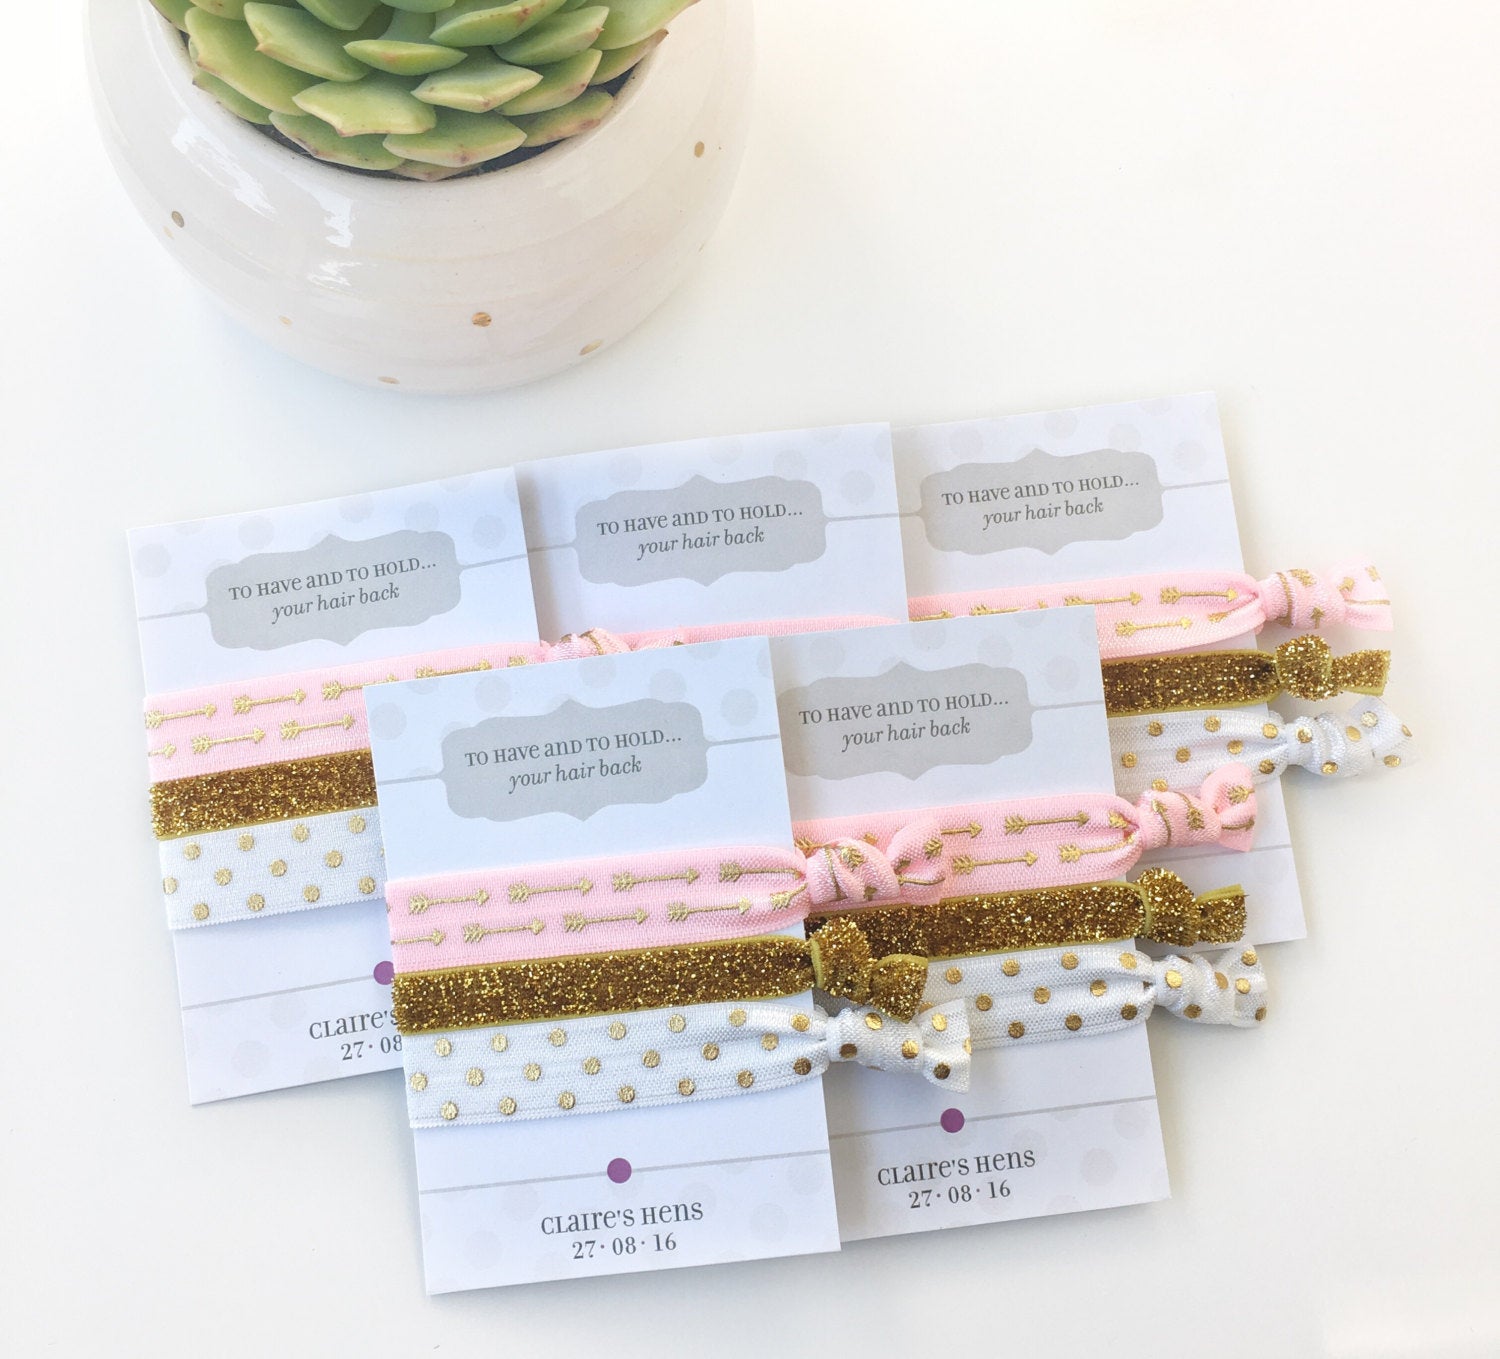 Pink and Gold Hen Party Favors, Bachelorette Hair Ties, Bachelorette Party Decorations, Pink and Gold Bachelorette, Hair Tie Favors - @PlumPolkaDot 